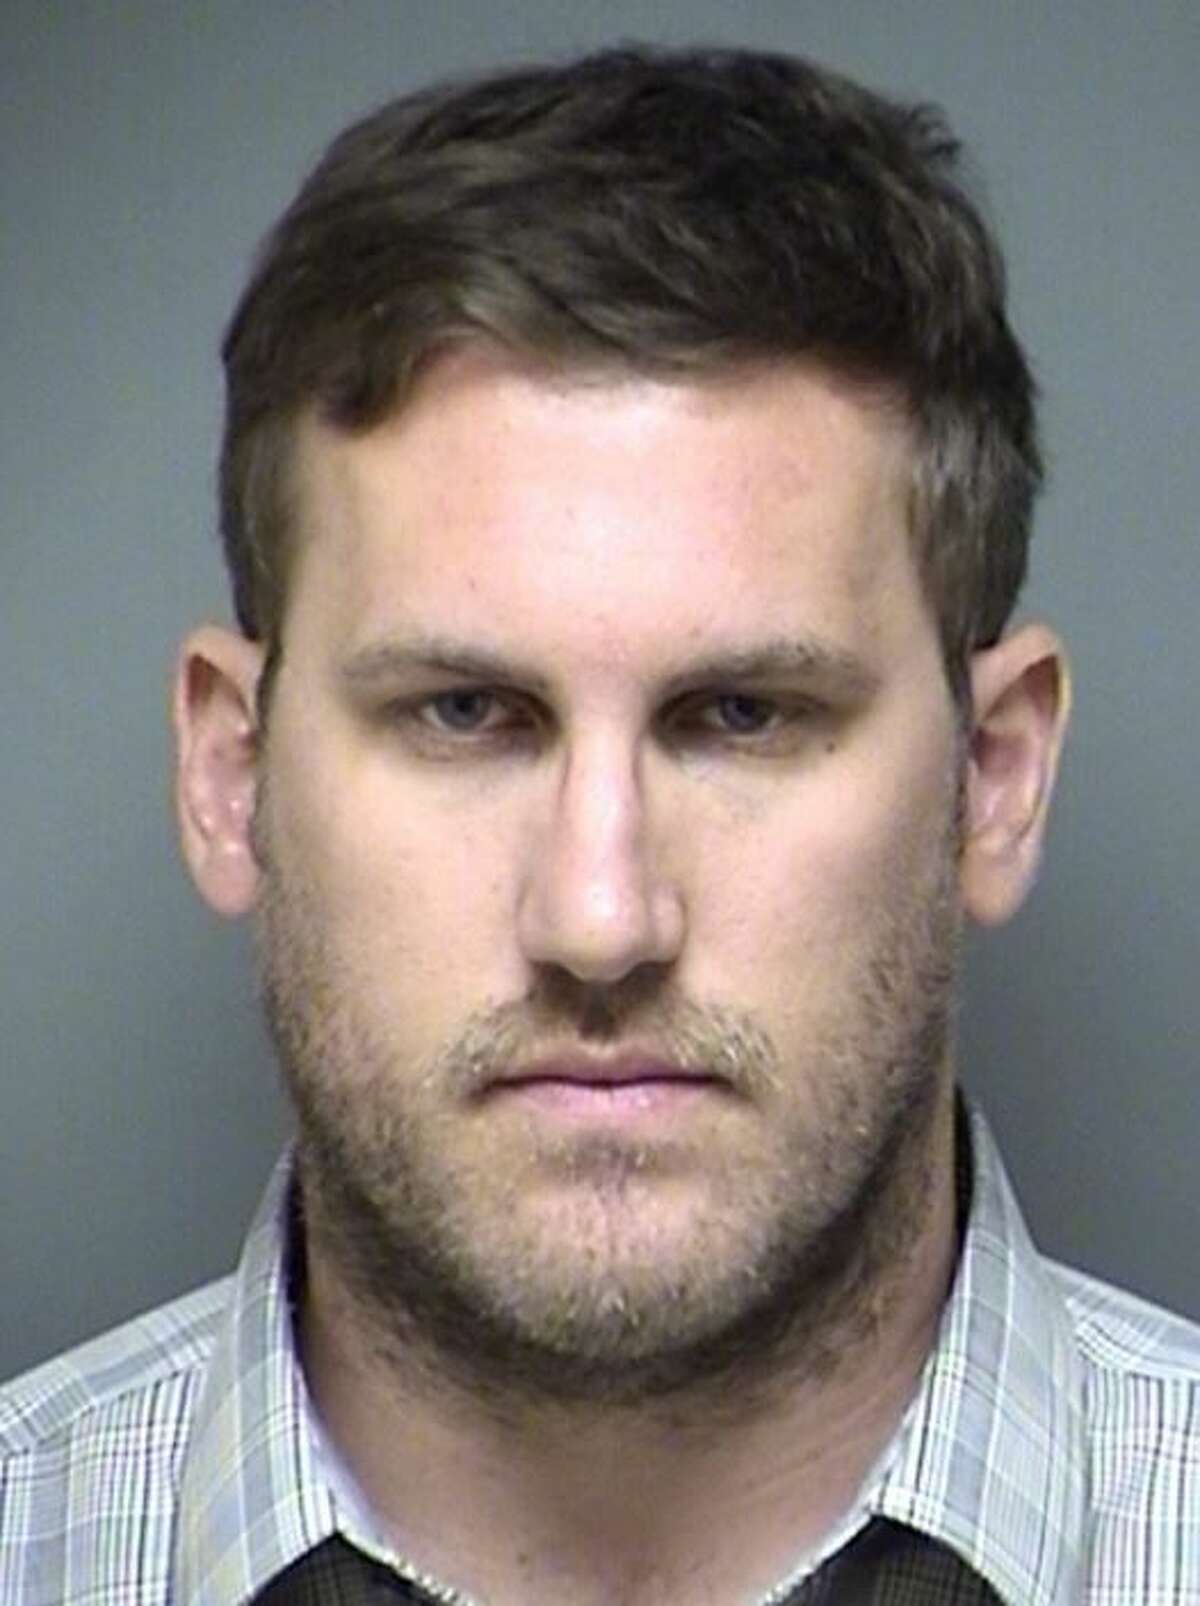 Krum police arrested Steven Scher, a 28-year-old band director at Krum High School near Denton, on June 17, 2015, for allegedly having a sexual relationship with a student. He has been charged with with having an inappropriate relationship with a student, a second-degree felony punishable by up to 20 years in prison if convicted.